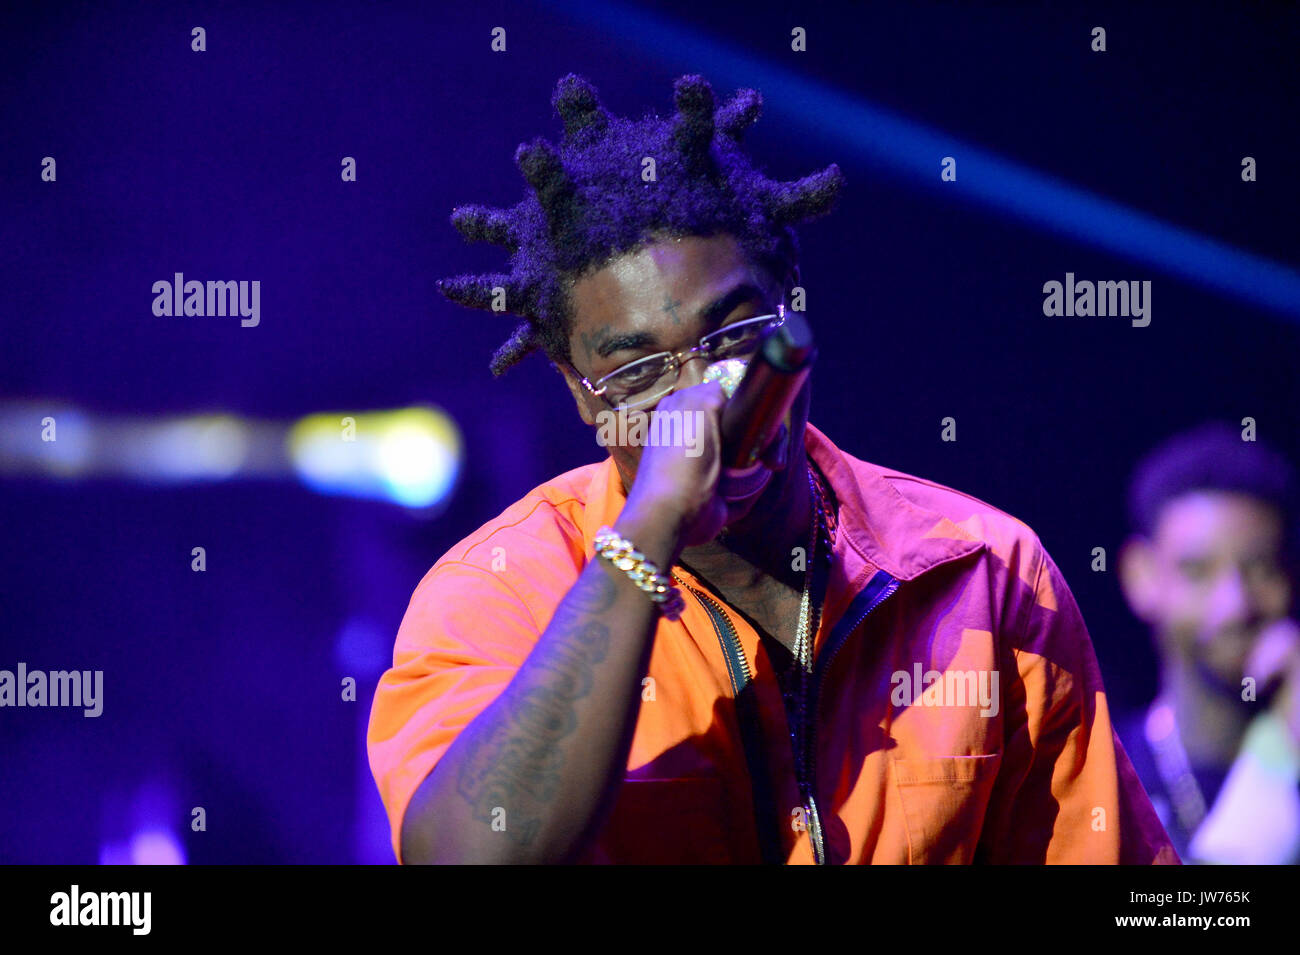 Coral Gables, FL, USA. 10th Aug, 2017. Kodak Black performs on stage at his Homecoming Concert first show since getting home from jail in June at Watsco Center on August 10, 2017 in Coral Gables, Florida. Credit: Mpi10/Media Punch/Alamy Live News Stock Photo